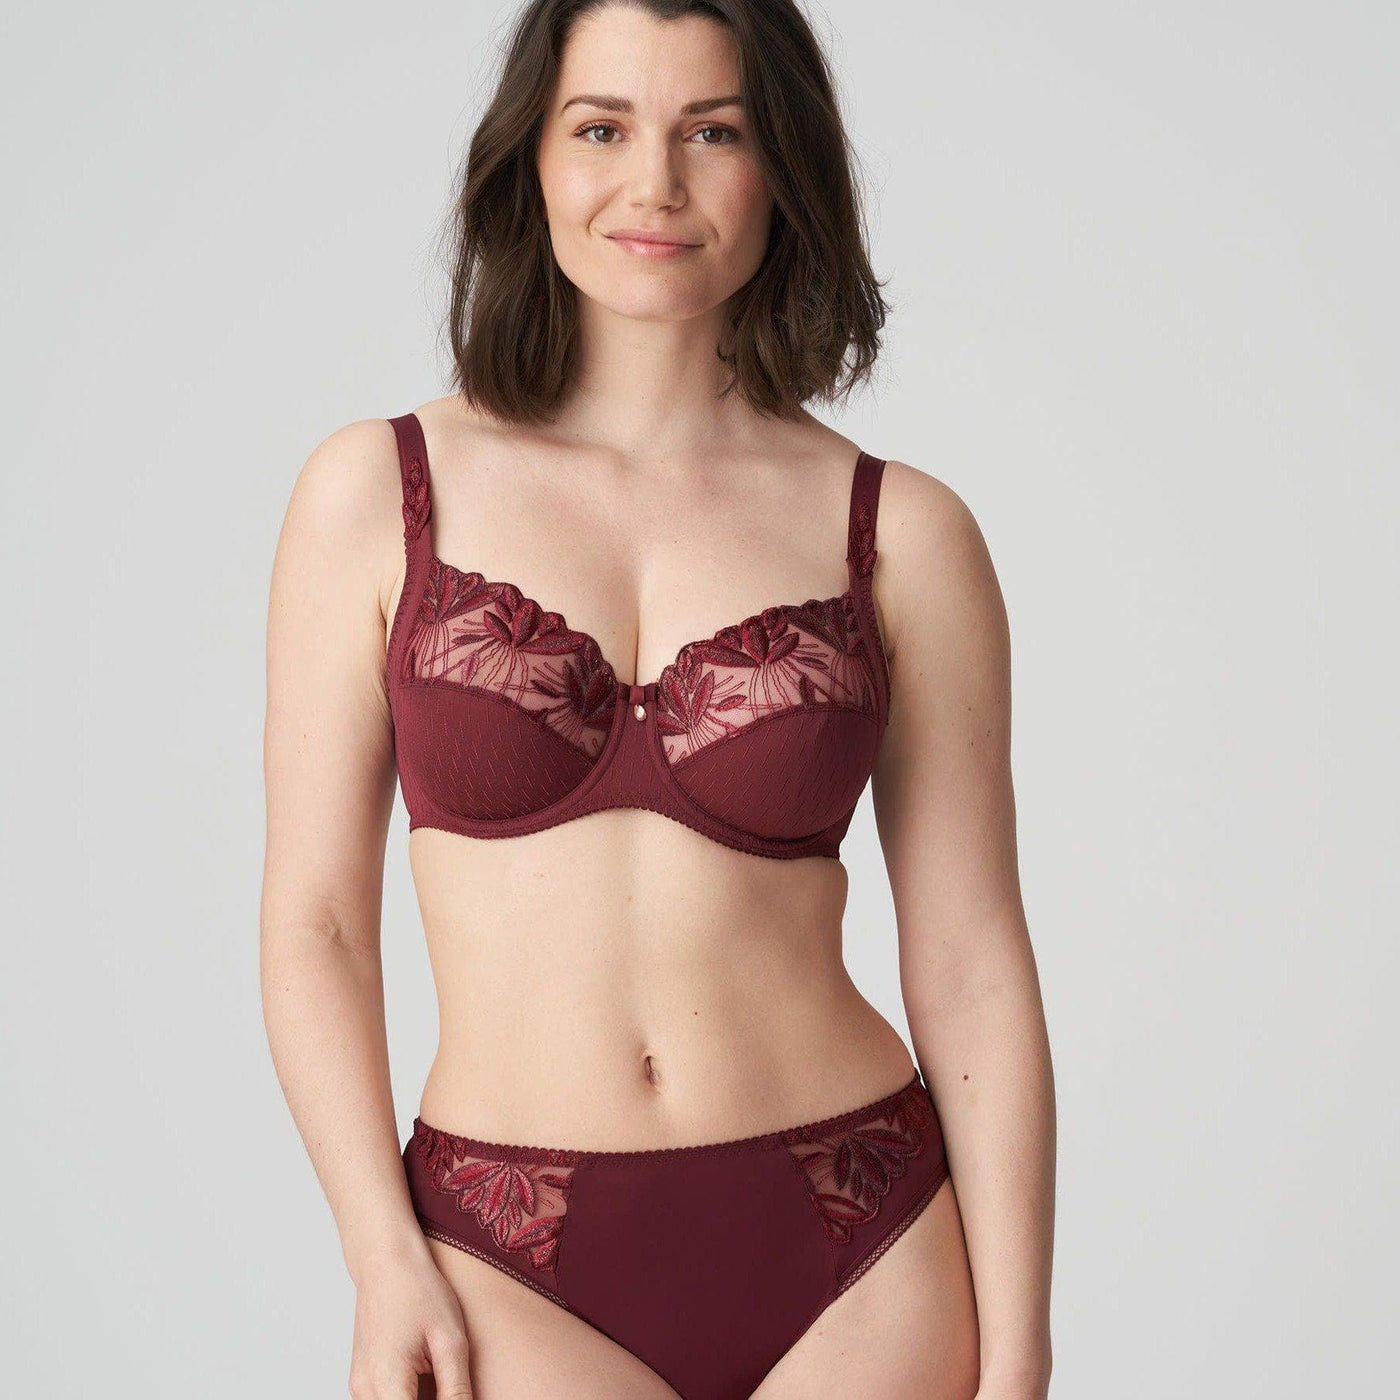 Prima Donna Orlando Full Cup Bra in Deep Cherry 0163150/51-Bras-Prima Donna-Deep Cherry-34-G-Anna Bella Fine Lingerie, Reveal Your Most Gorgeous Self!